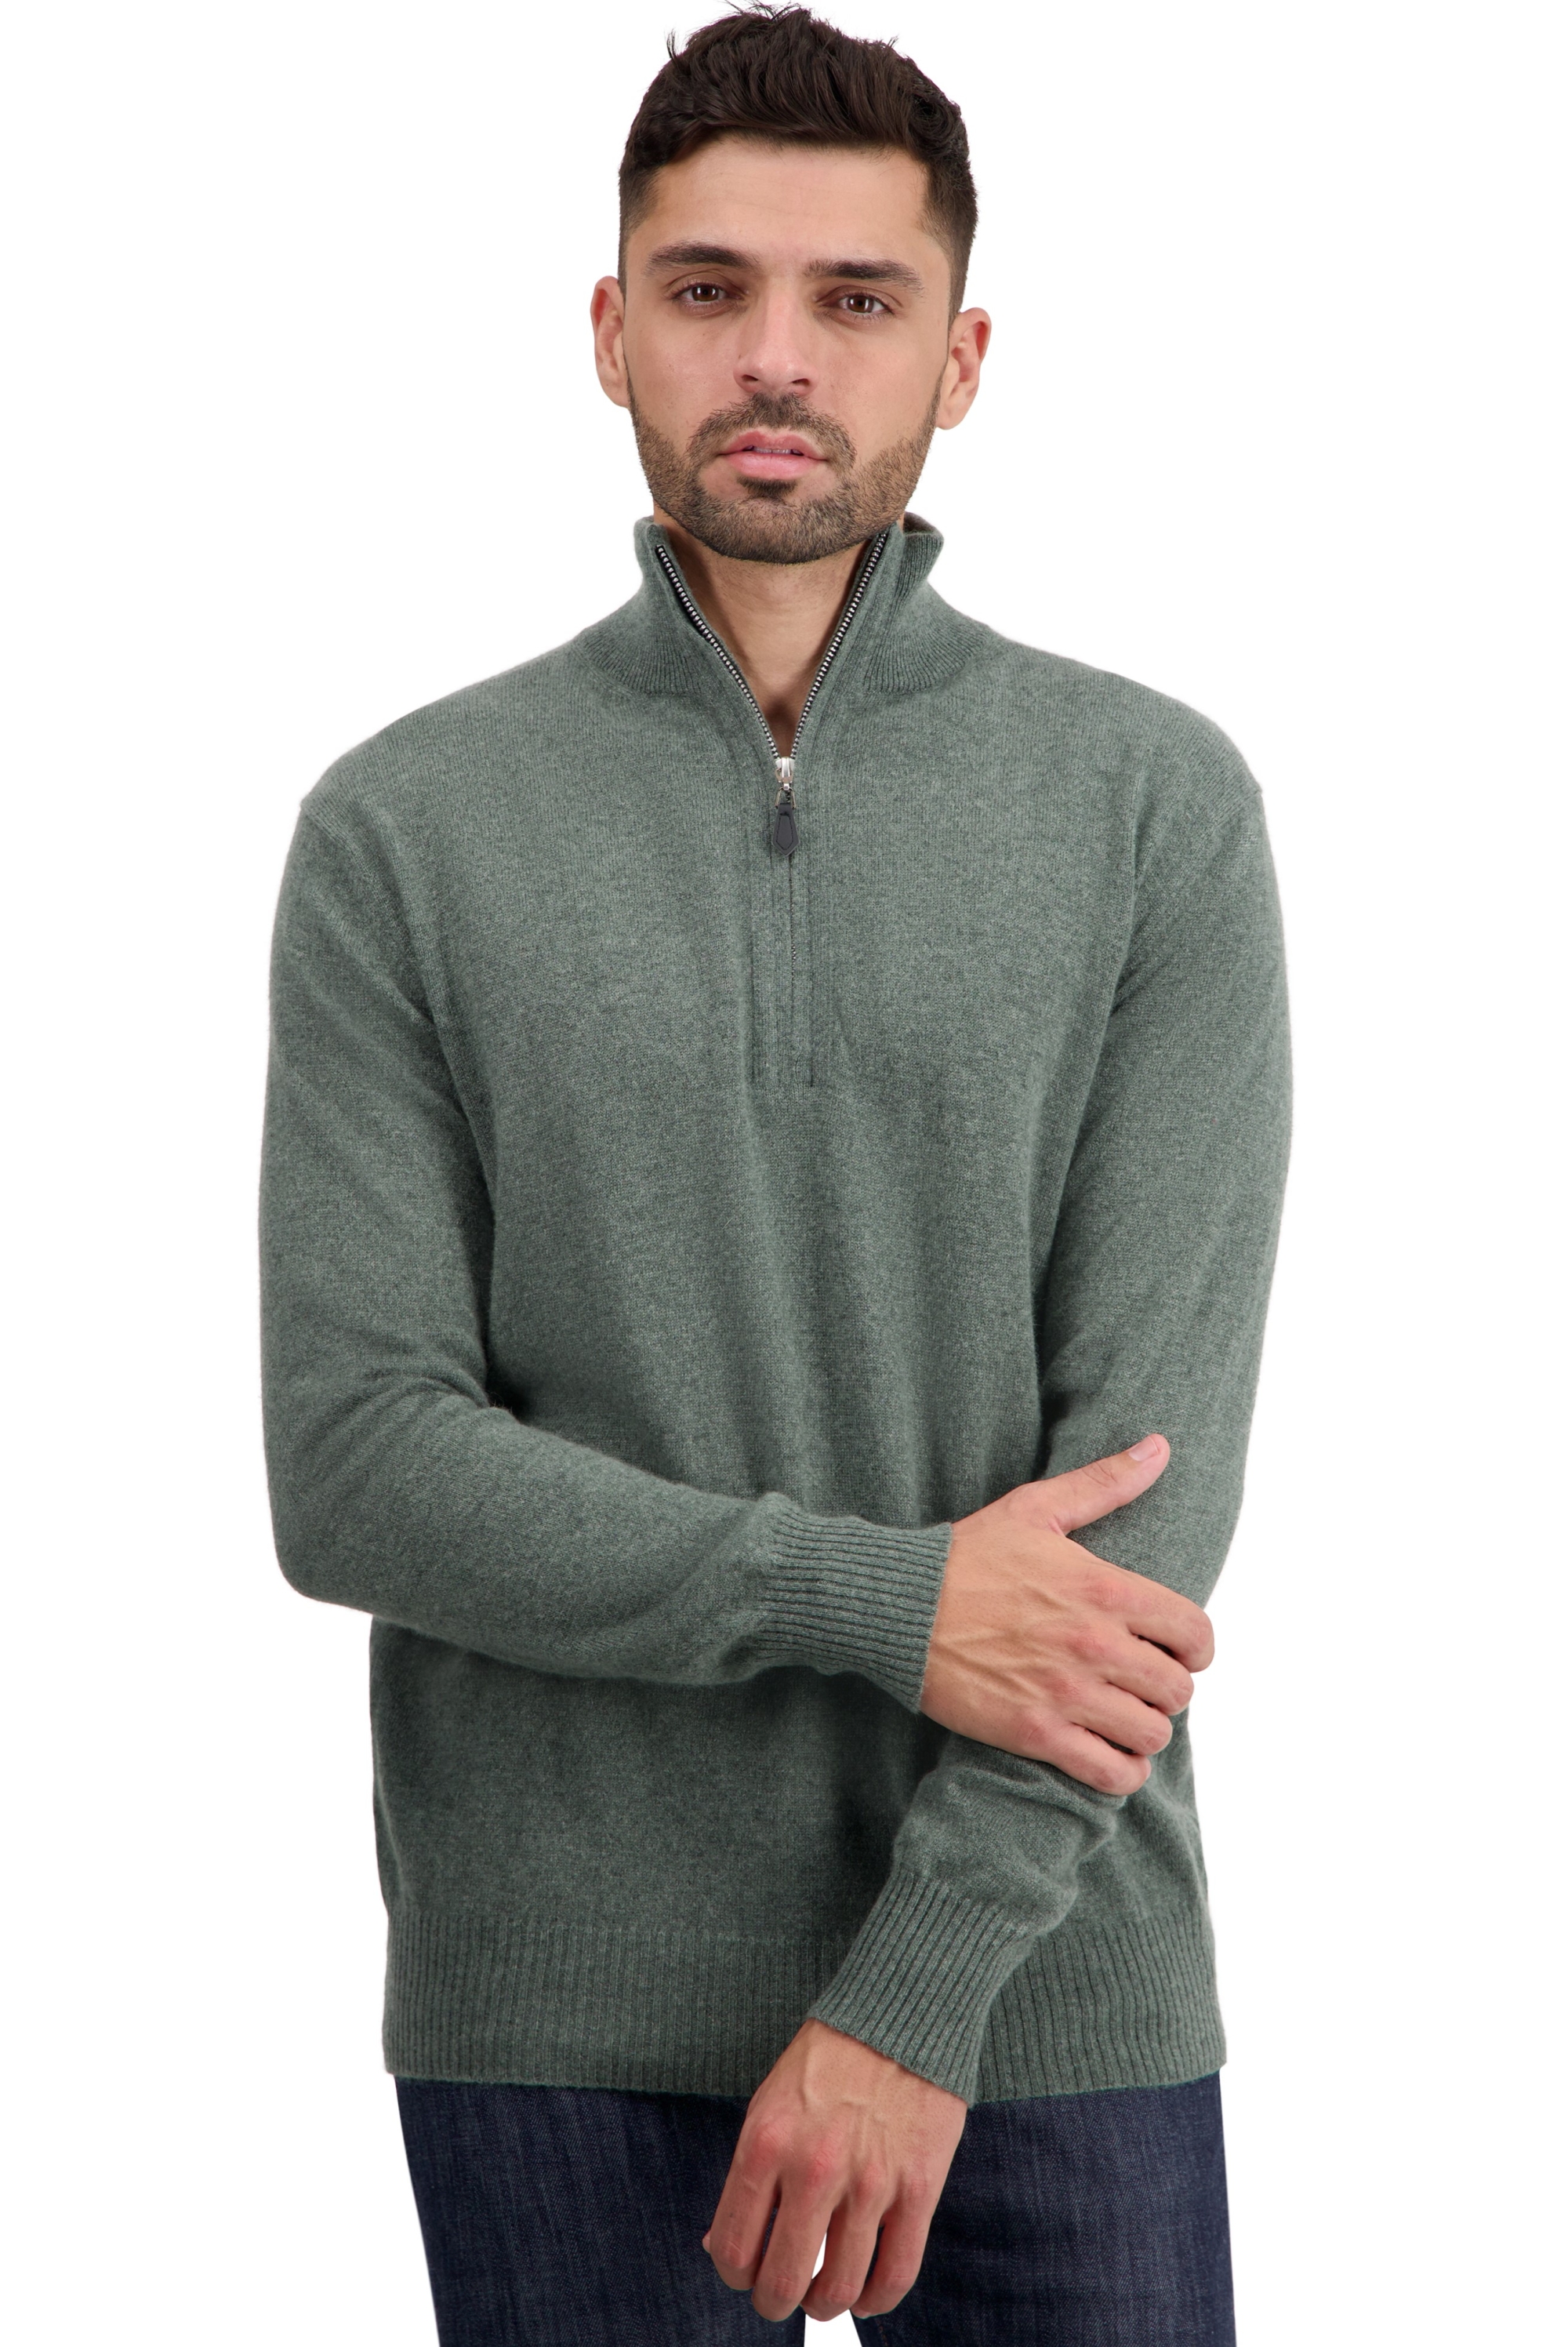 Cashmere men basic sweaters at low prices toulon first military green m